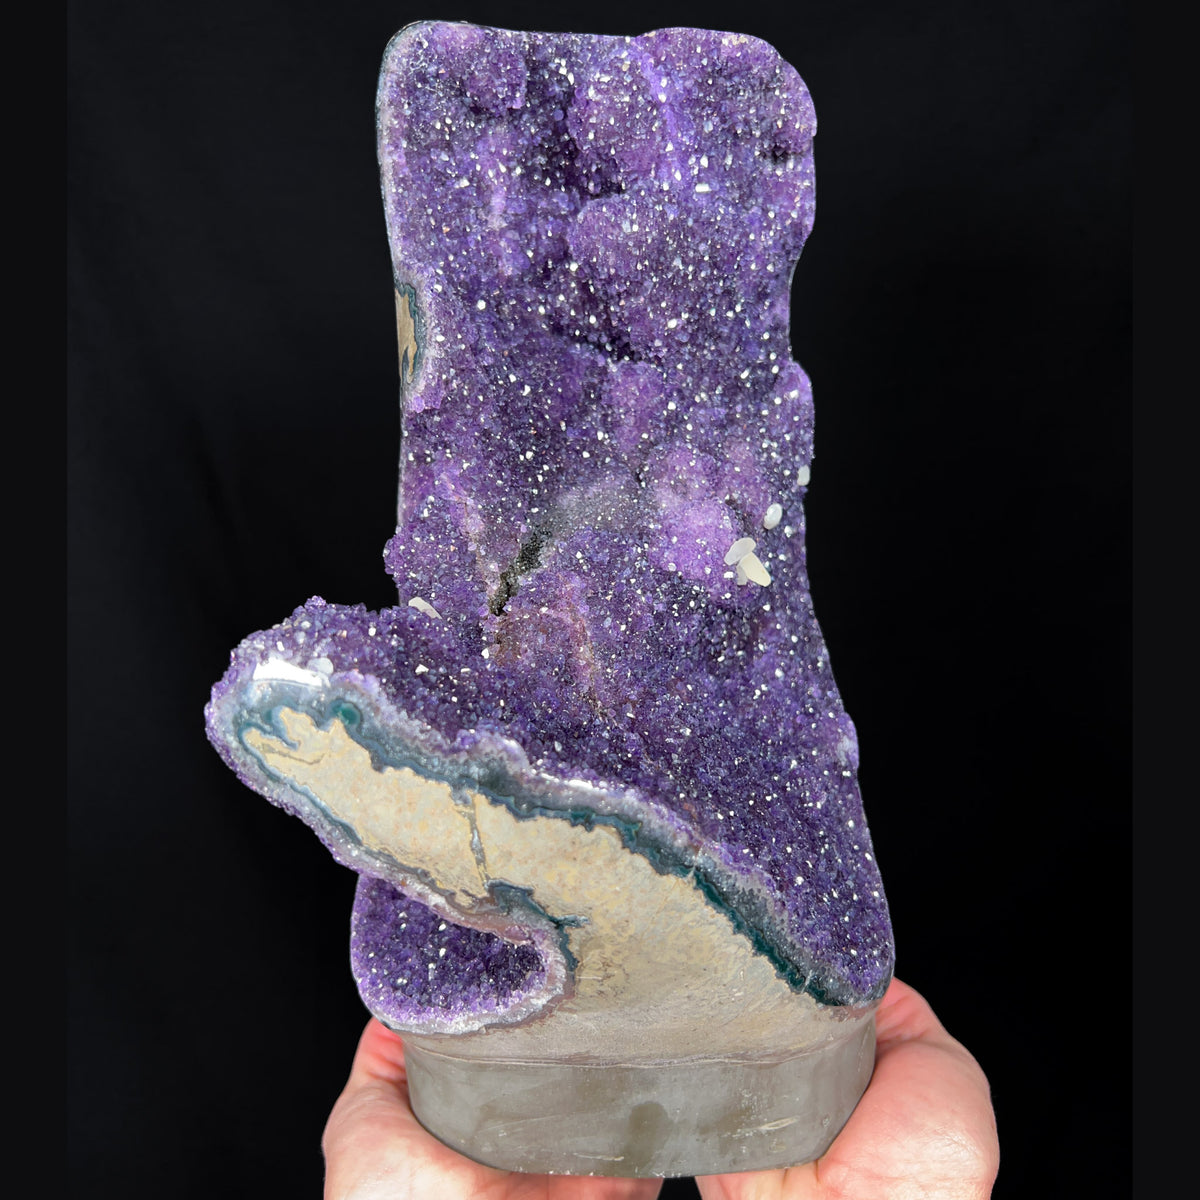 Large Purple Amethyst Geode with White Calcite Crystals